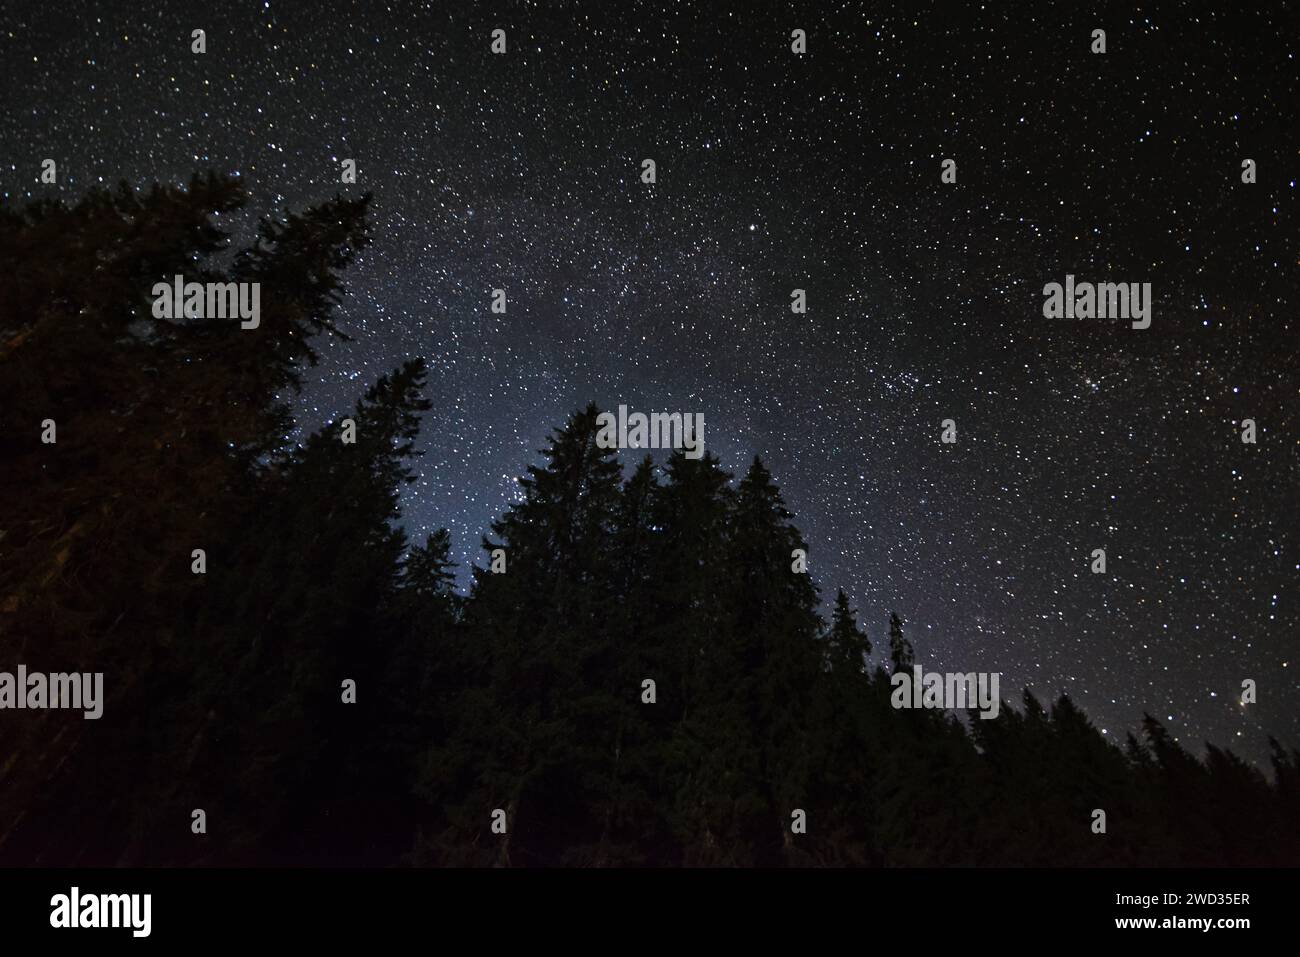 Starry night sky against a dark forest background. Beautiful night landscape. Stock Photo